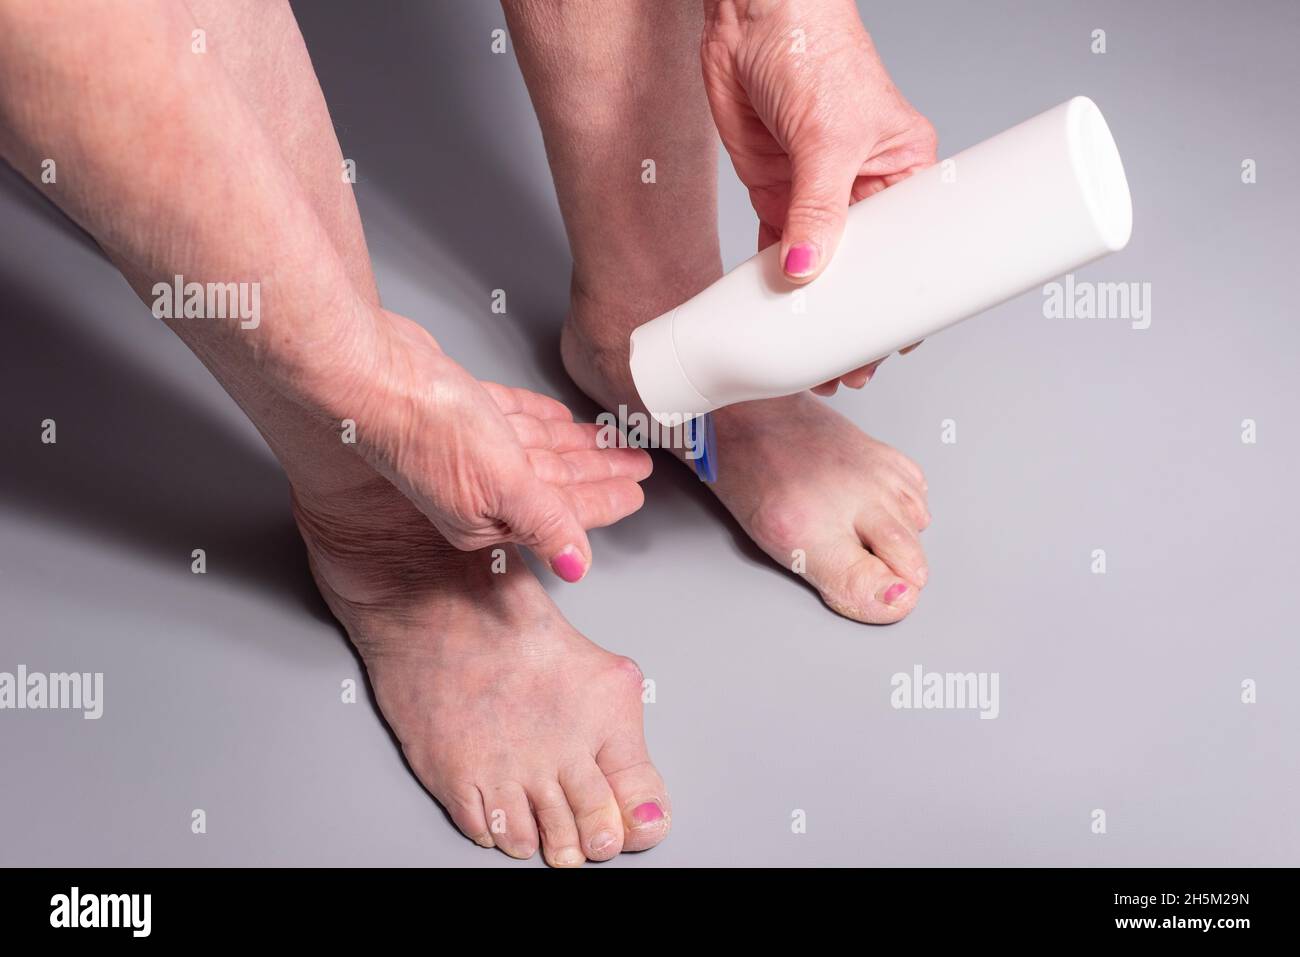 foot cream old woman applying cream from a tube to feet on a gray background Stock Photo